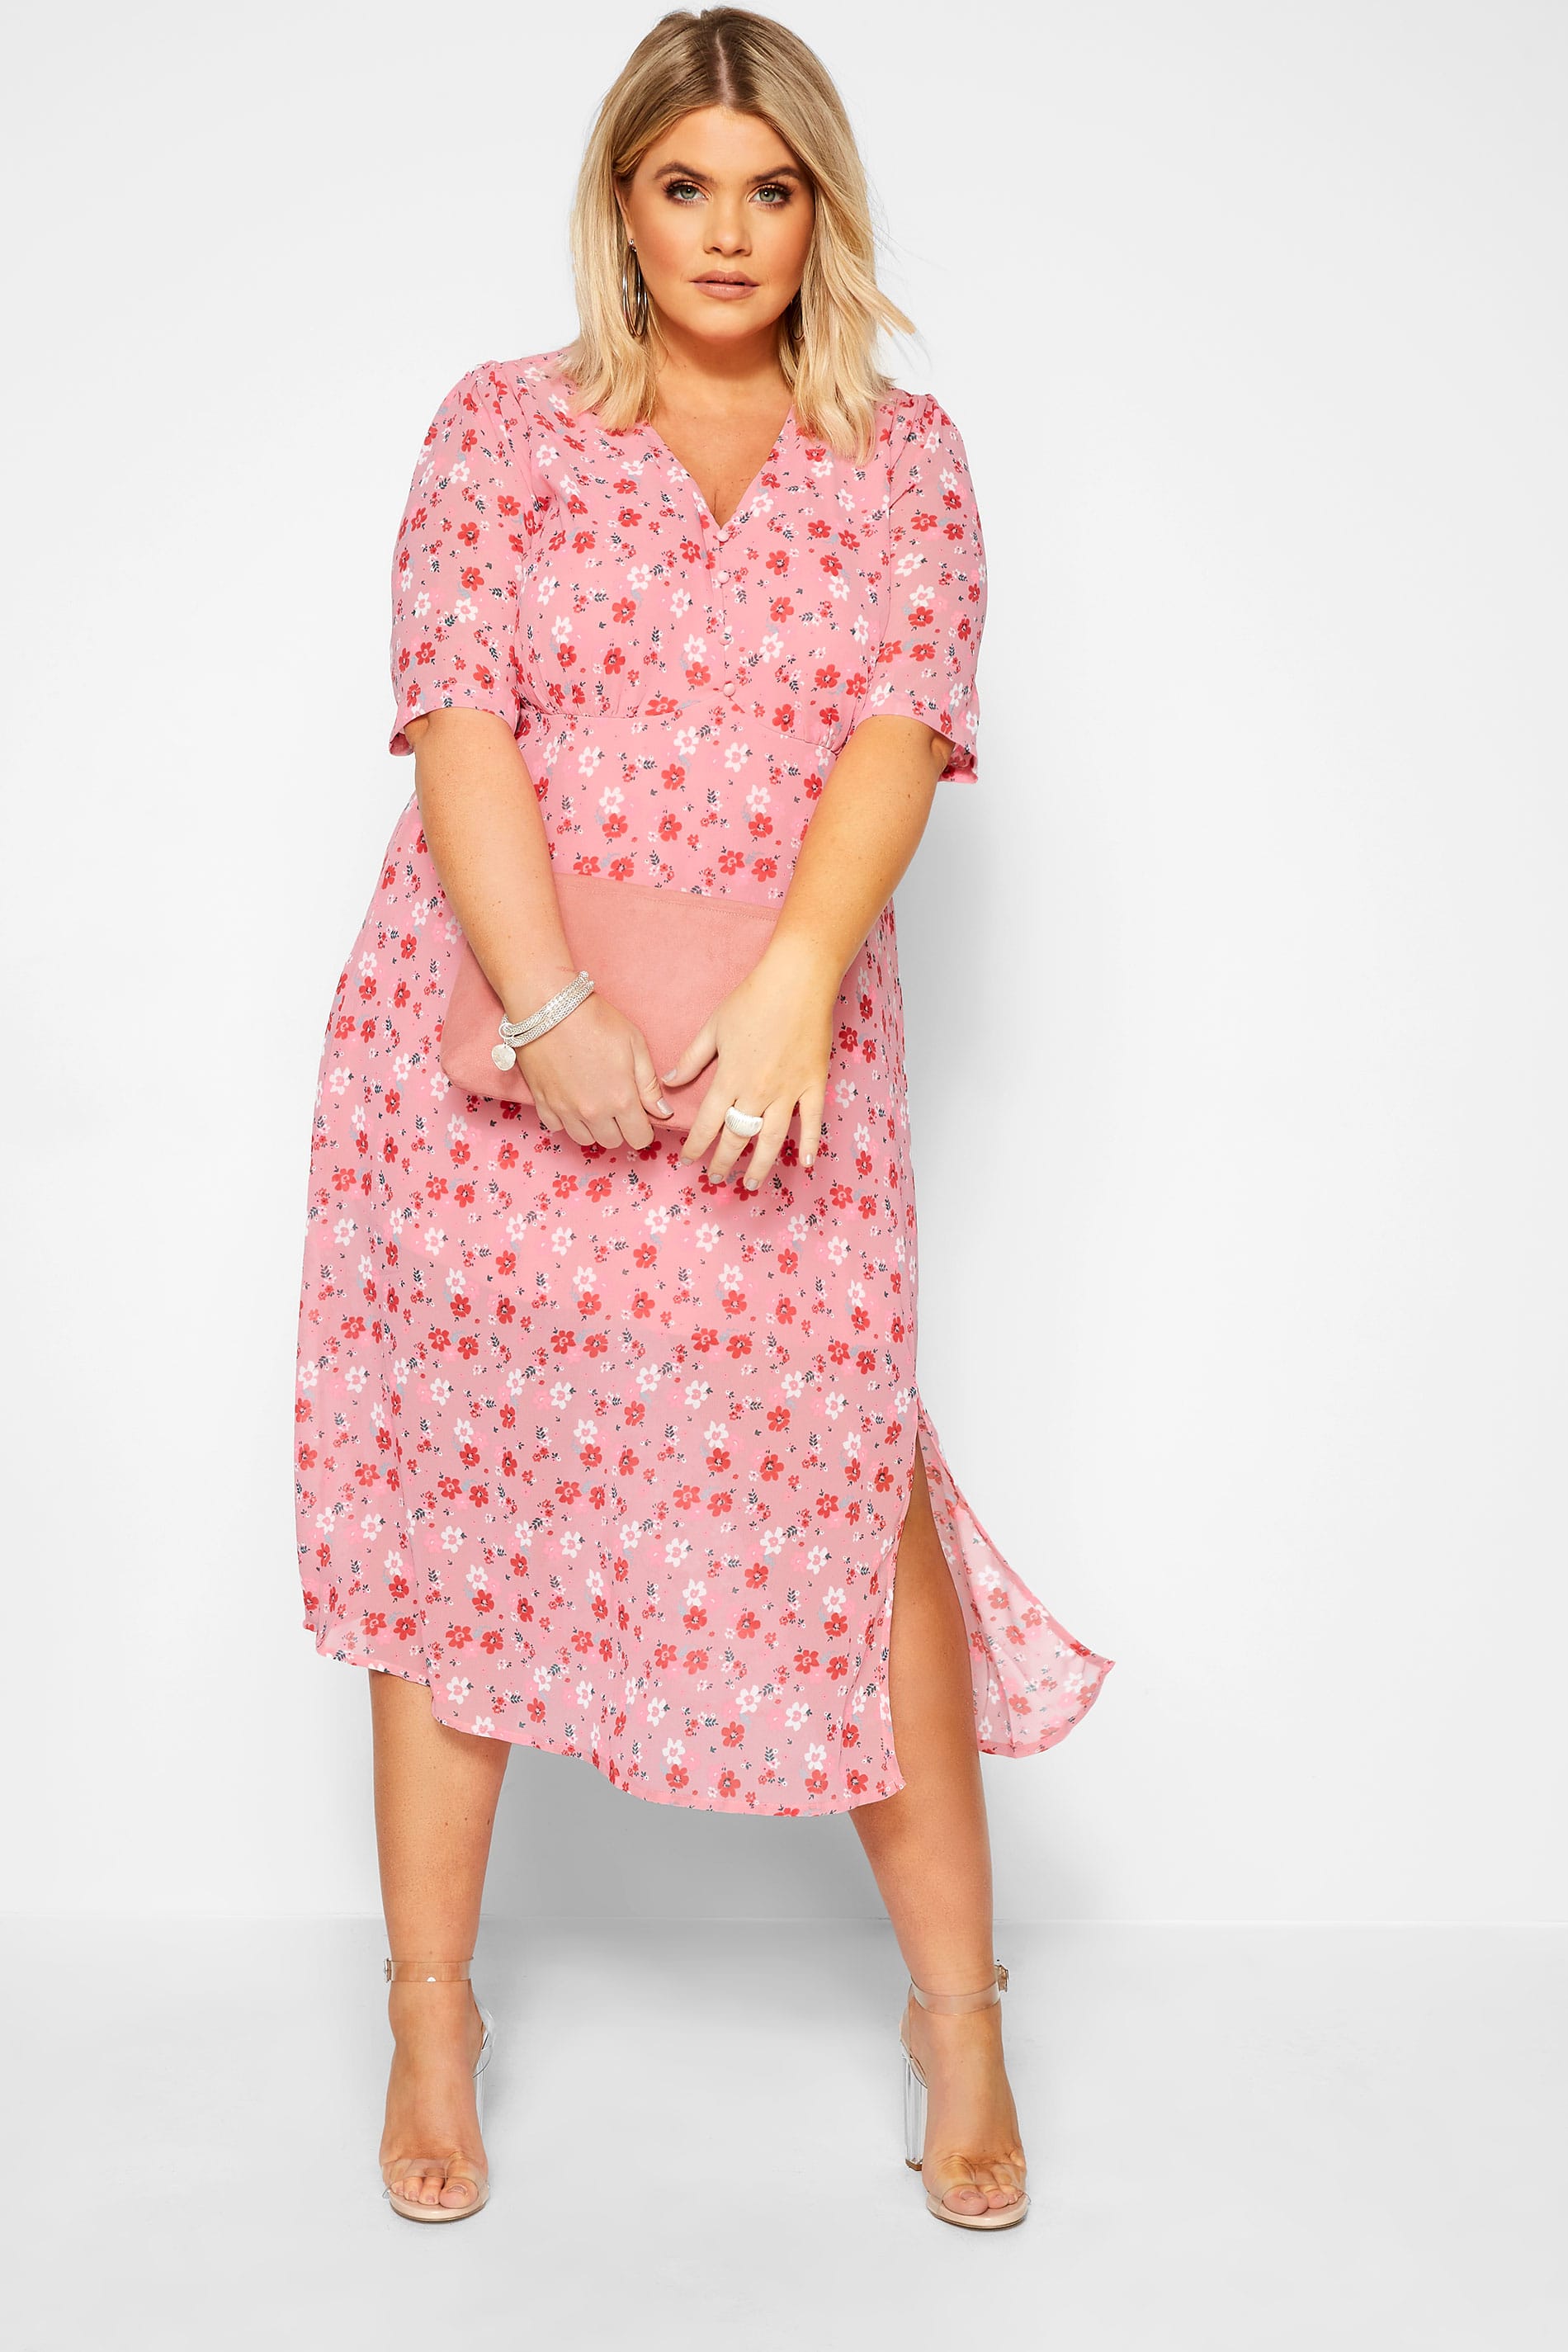 WEDNESDAY'S GIRL Pink Floral Chiffon Tea Dress | Yours Clothing